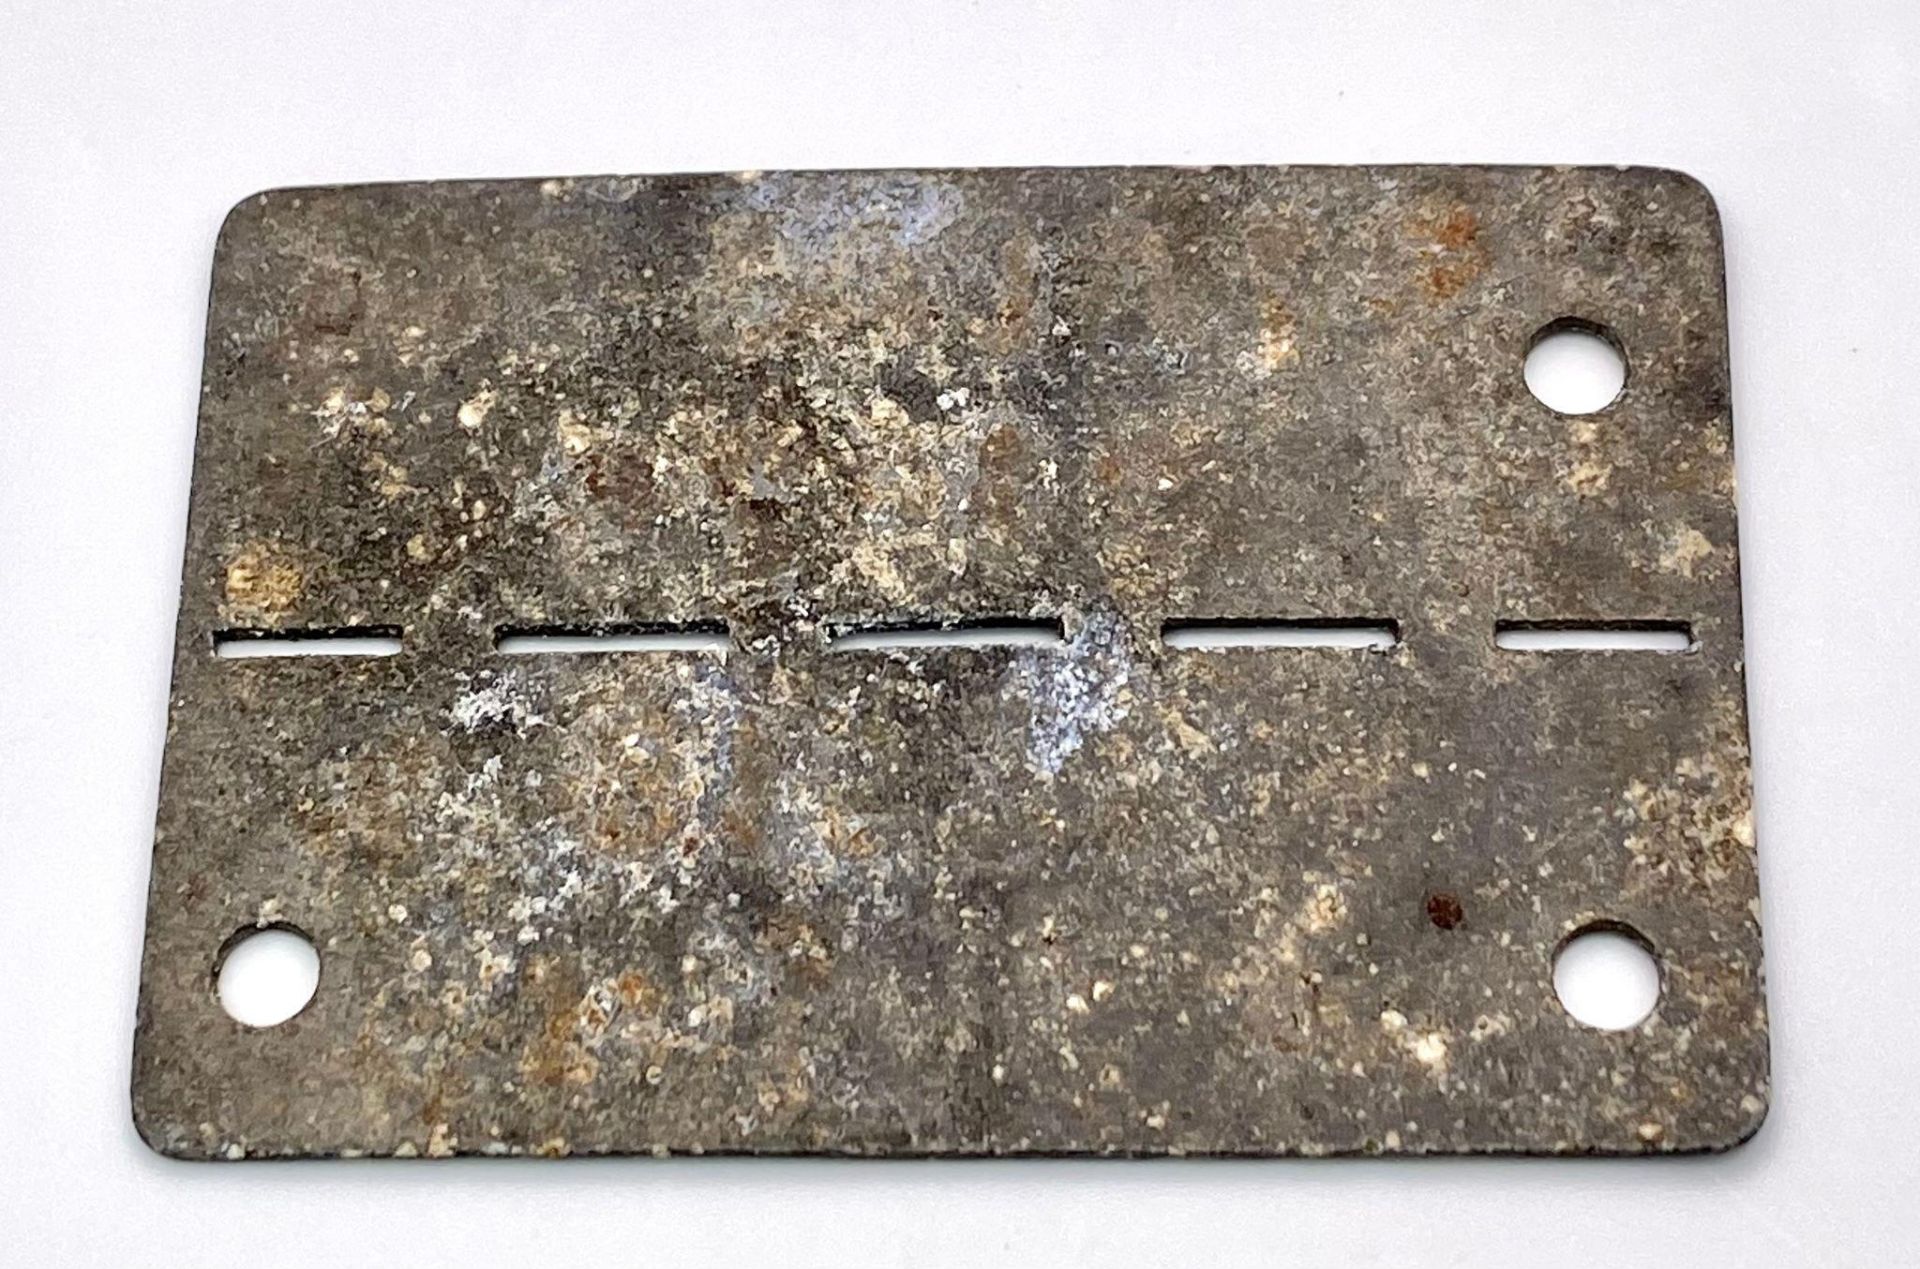 WW2 Prisoner of War Dog Tag for Stalag VIII-B, which was later renumbered Stalag-344, located near - Bild 3 aus 3